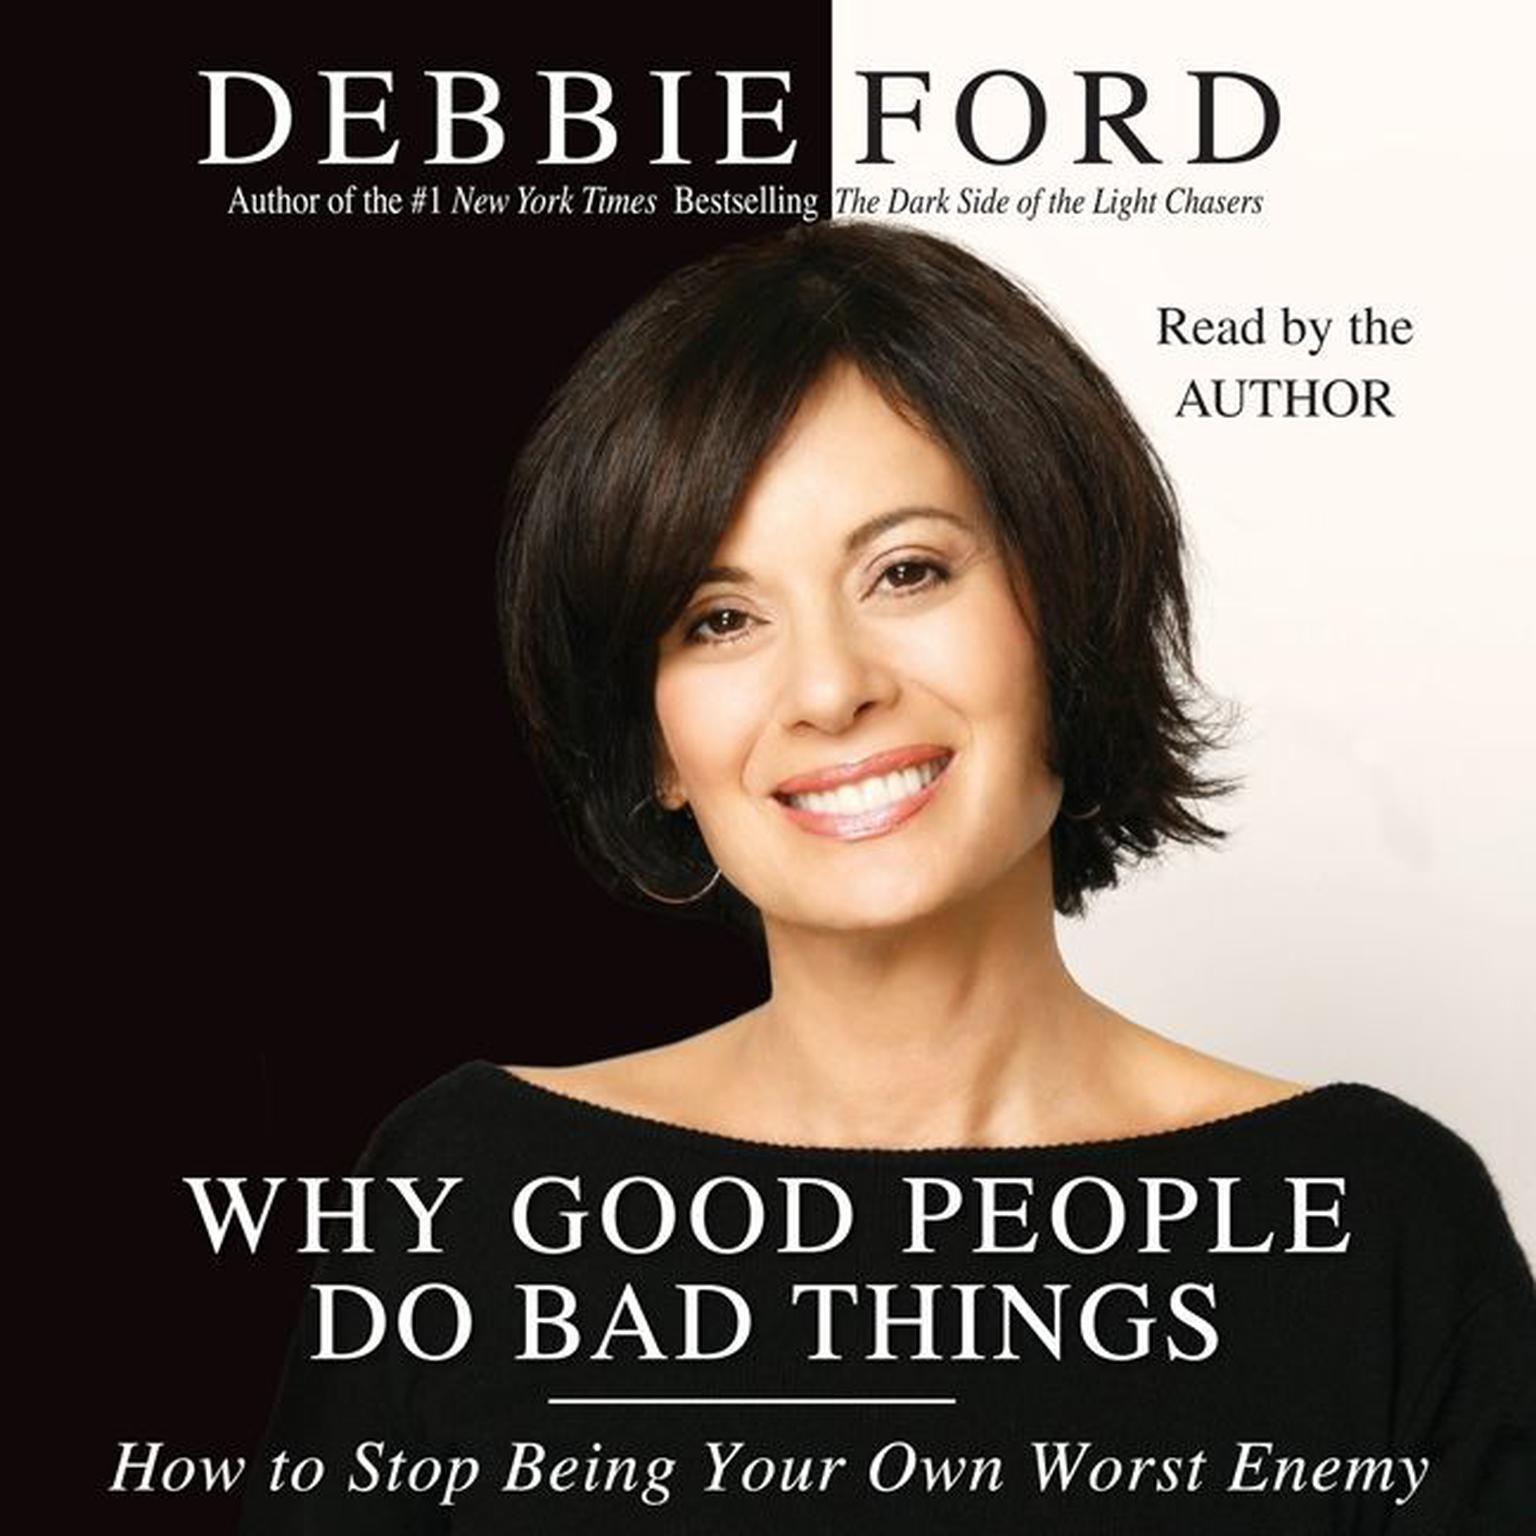 Why Good People Do Bad Things (Abridged): How to Stop Being Your Own Worst Enemy Audiobook, by Debbie Ford